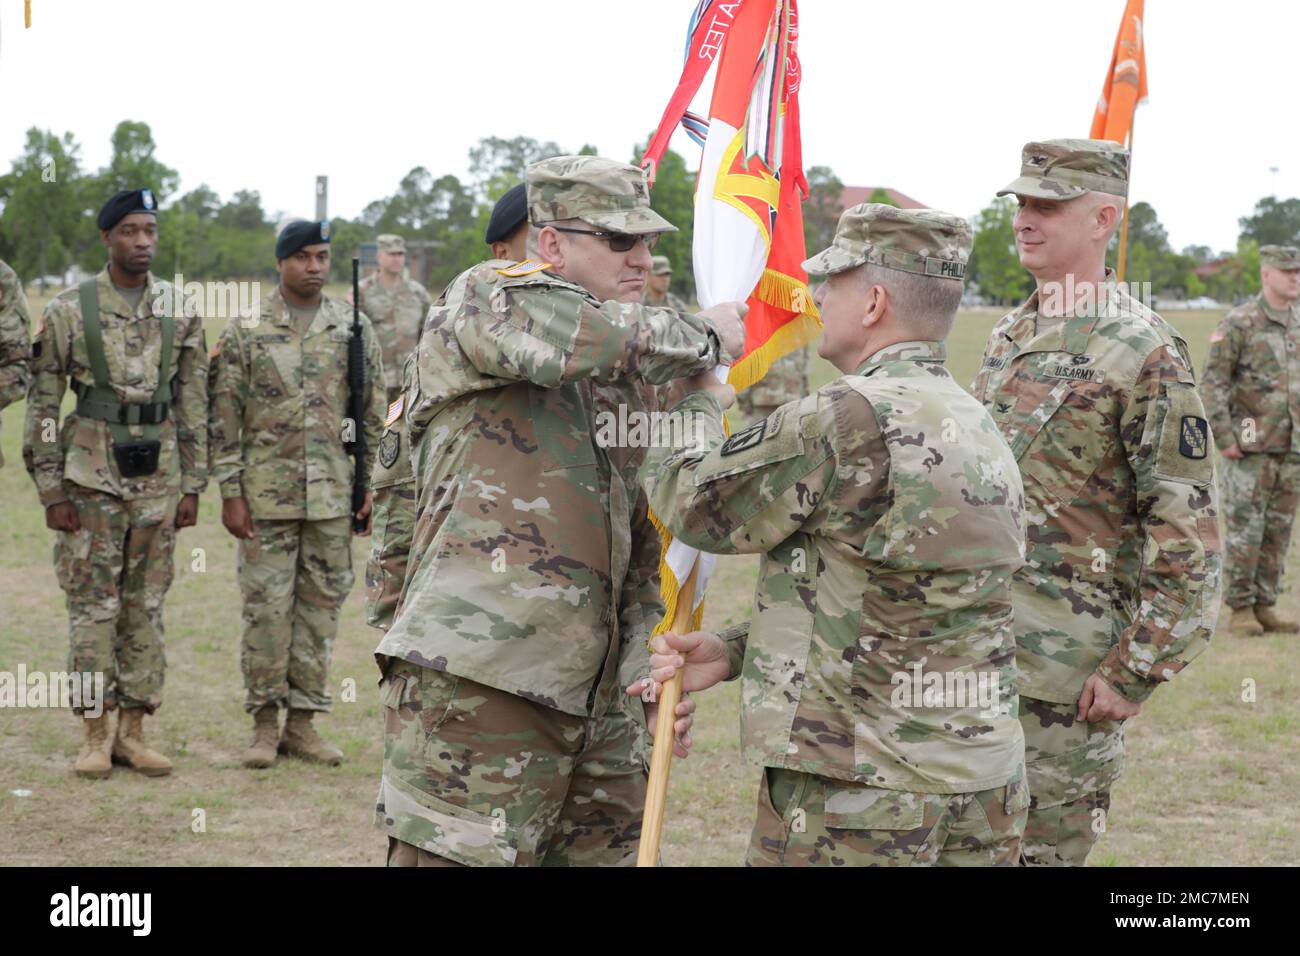 U.S. Army Major. Gen. John H. Phillips,  commanding general, 335th Signal Command Theater, passes the 359 TTSB guidon to Col. Tracy G. Monteith, incoming commander of the 359th Theater Tactical Signal Brigade, during the change of command ceremony at Barton Field on Fort Gordon in Augusta, Ga on June 26, 2022. Col. Travis A. Hartman relinquished command of the 359th TTSB to Col. Tracy G. Monteith, ceremony was presided over by Major. Gen. John H. Phillips,  commanding general, 335th Signal Command Theater. Stock Photo